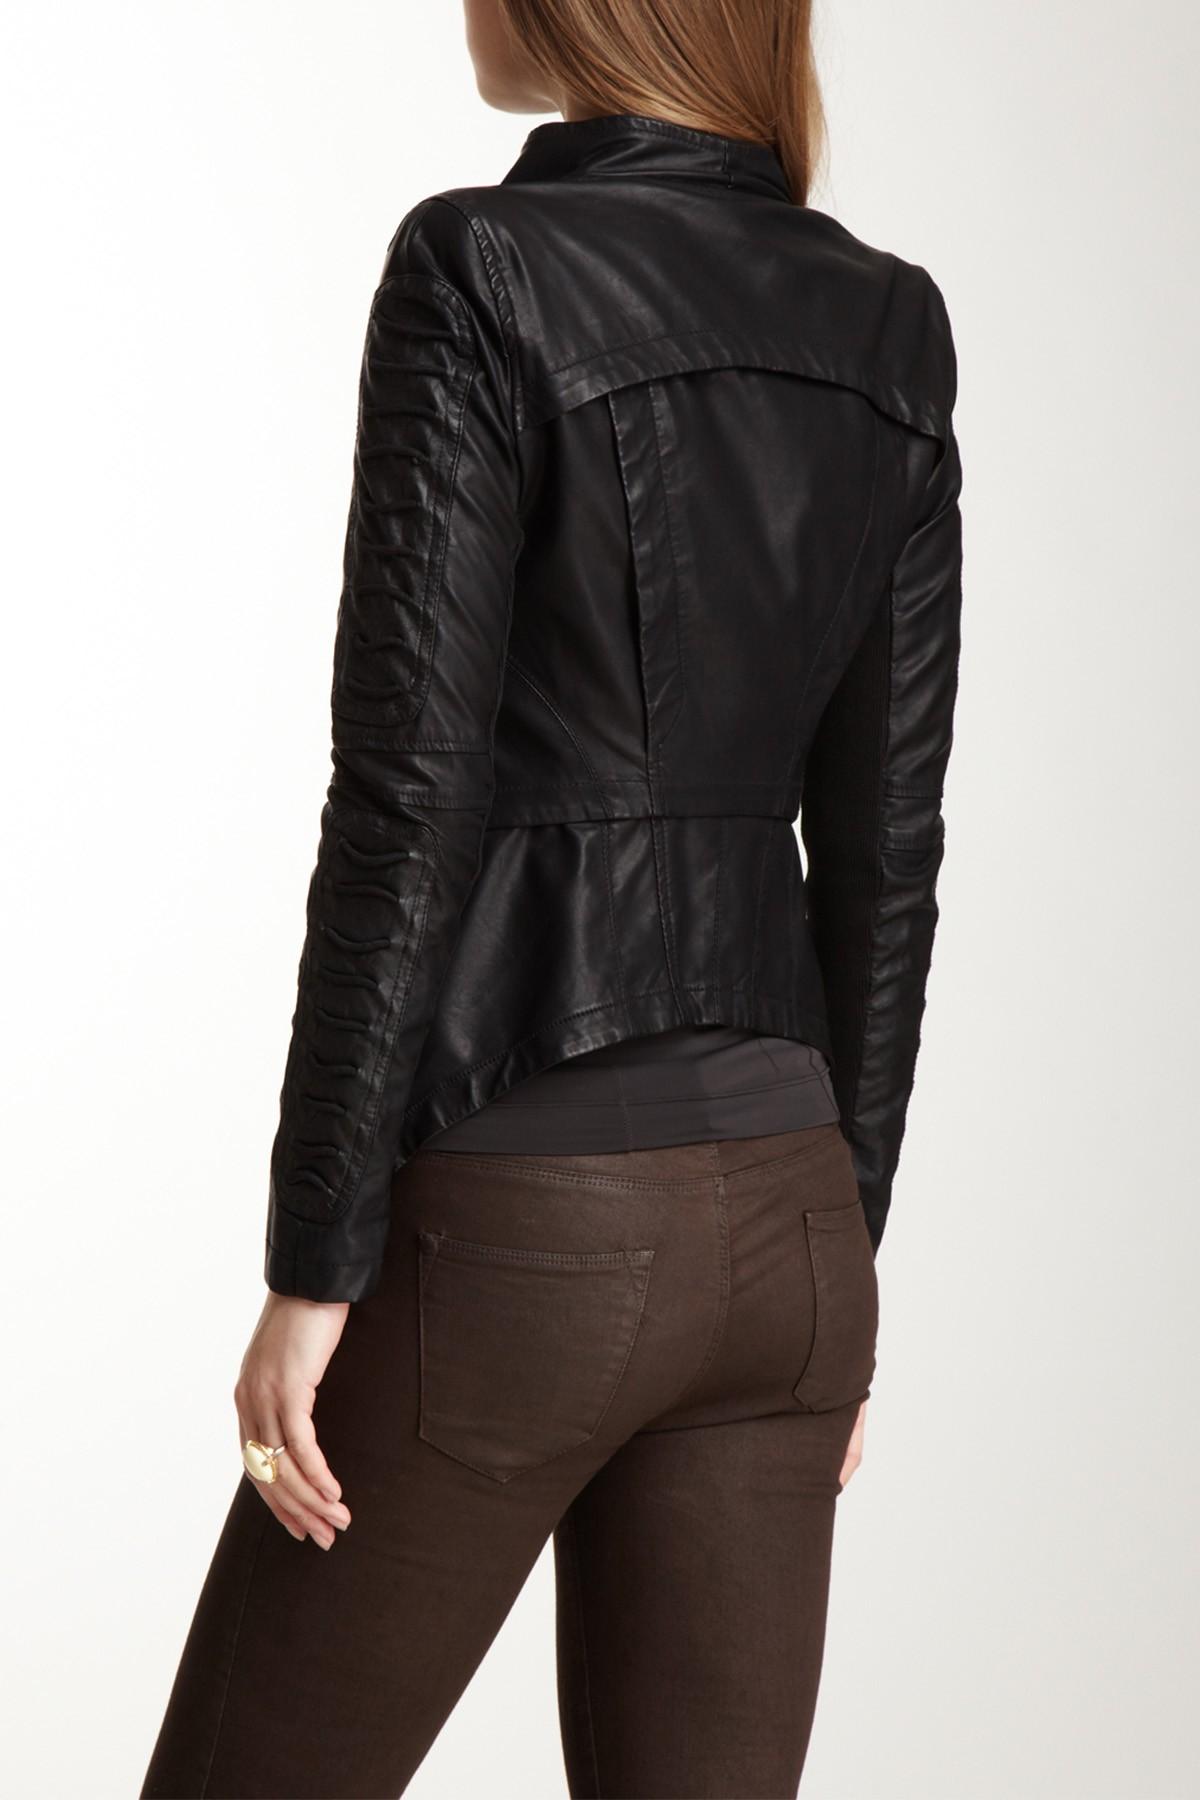 Gracia Cotton Faux Leather Jacket in Black - Lyst